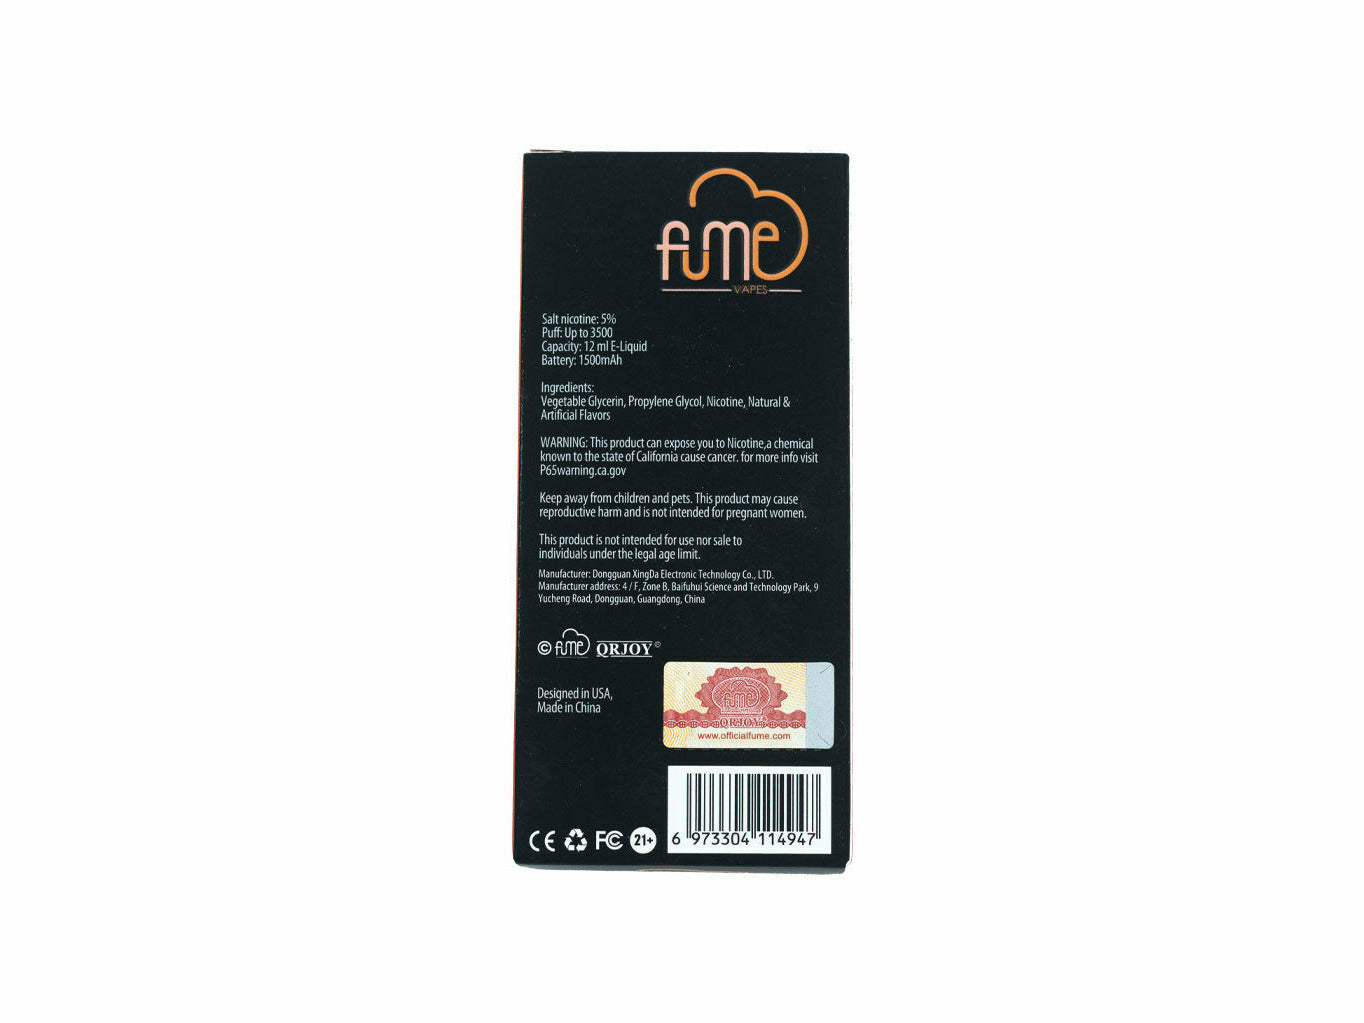 Fume Peach Ice Infinity disposable, back package description